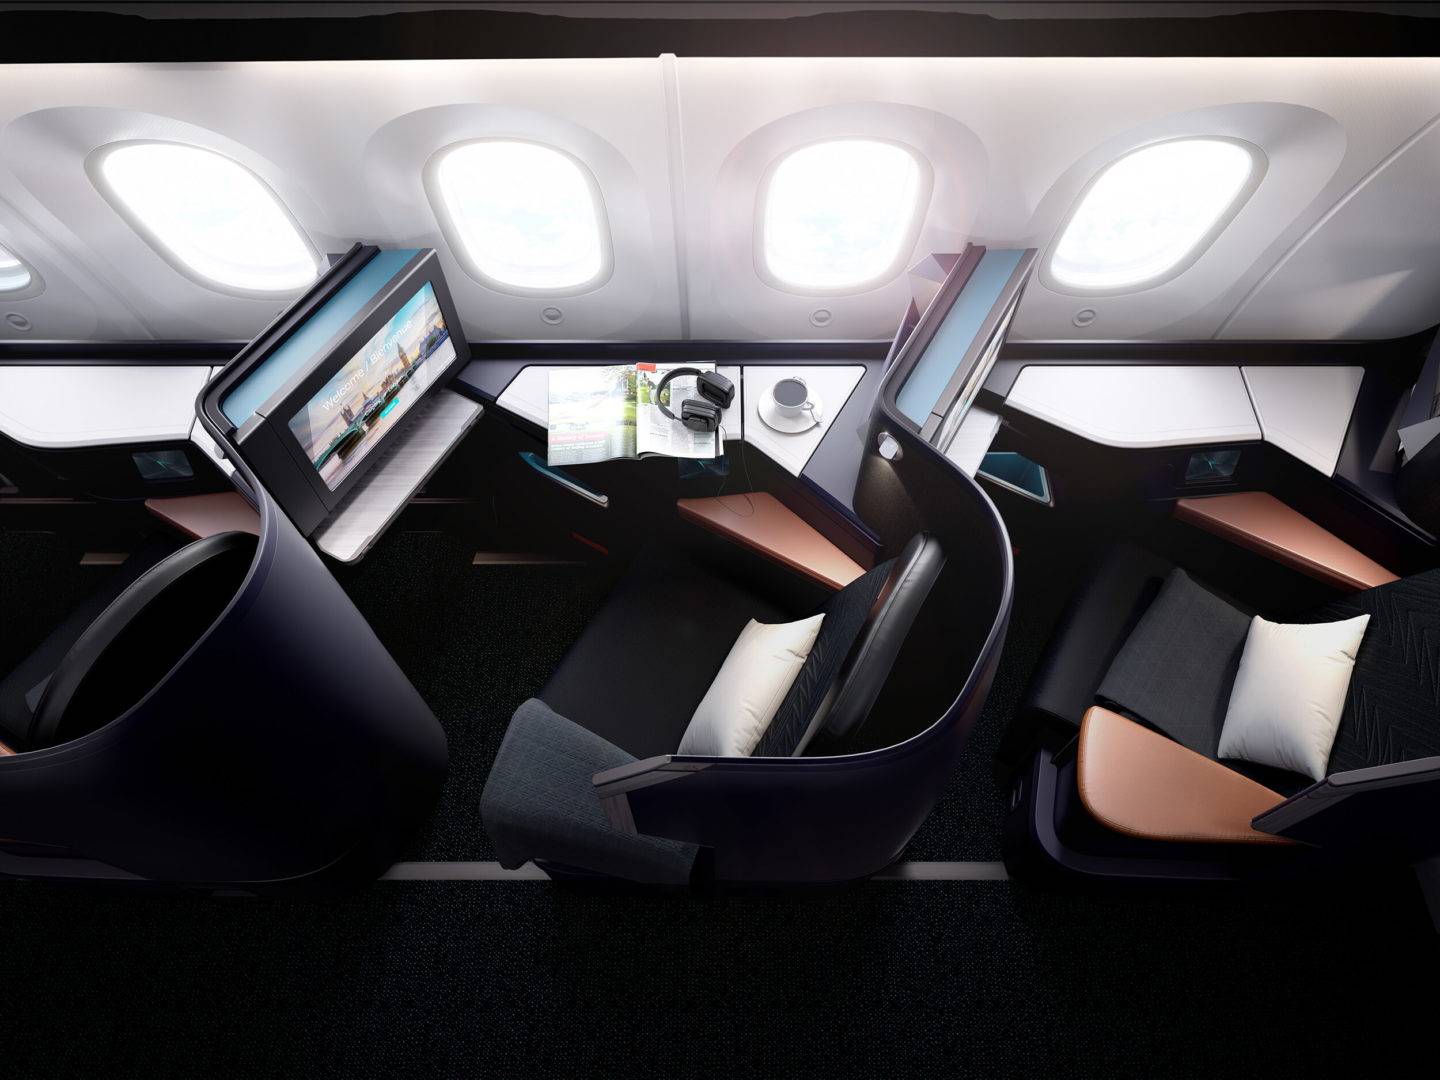 Overhead view of the new Business Class seat onboard WestJet's B787 aircraft